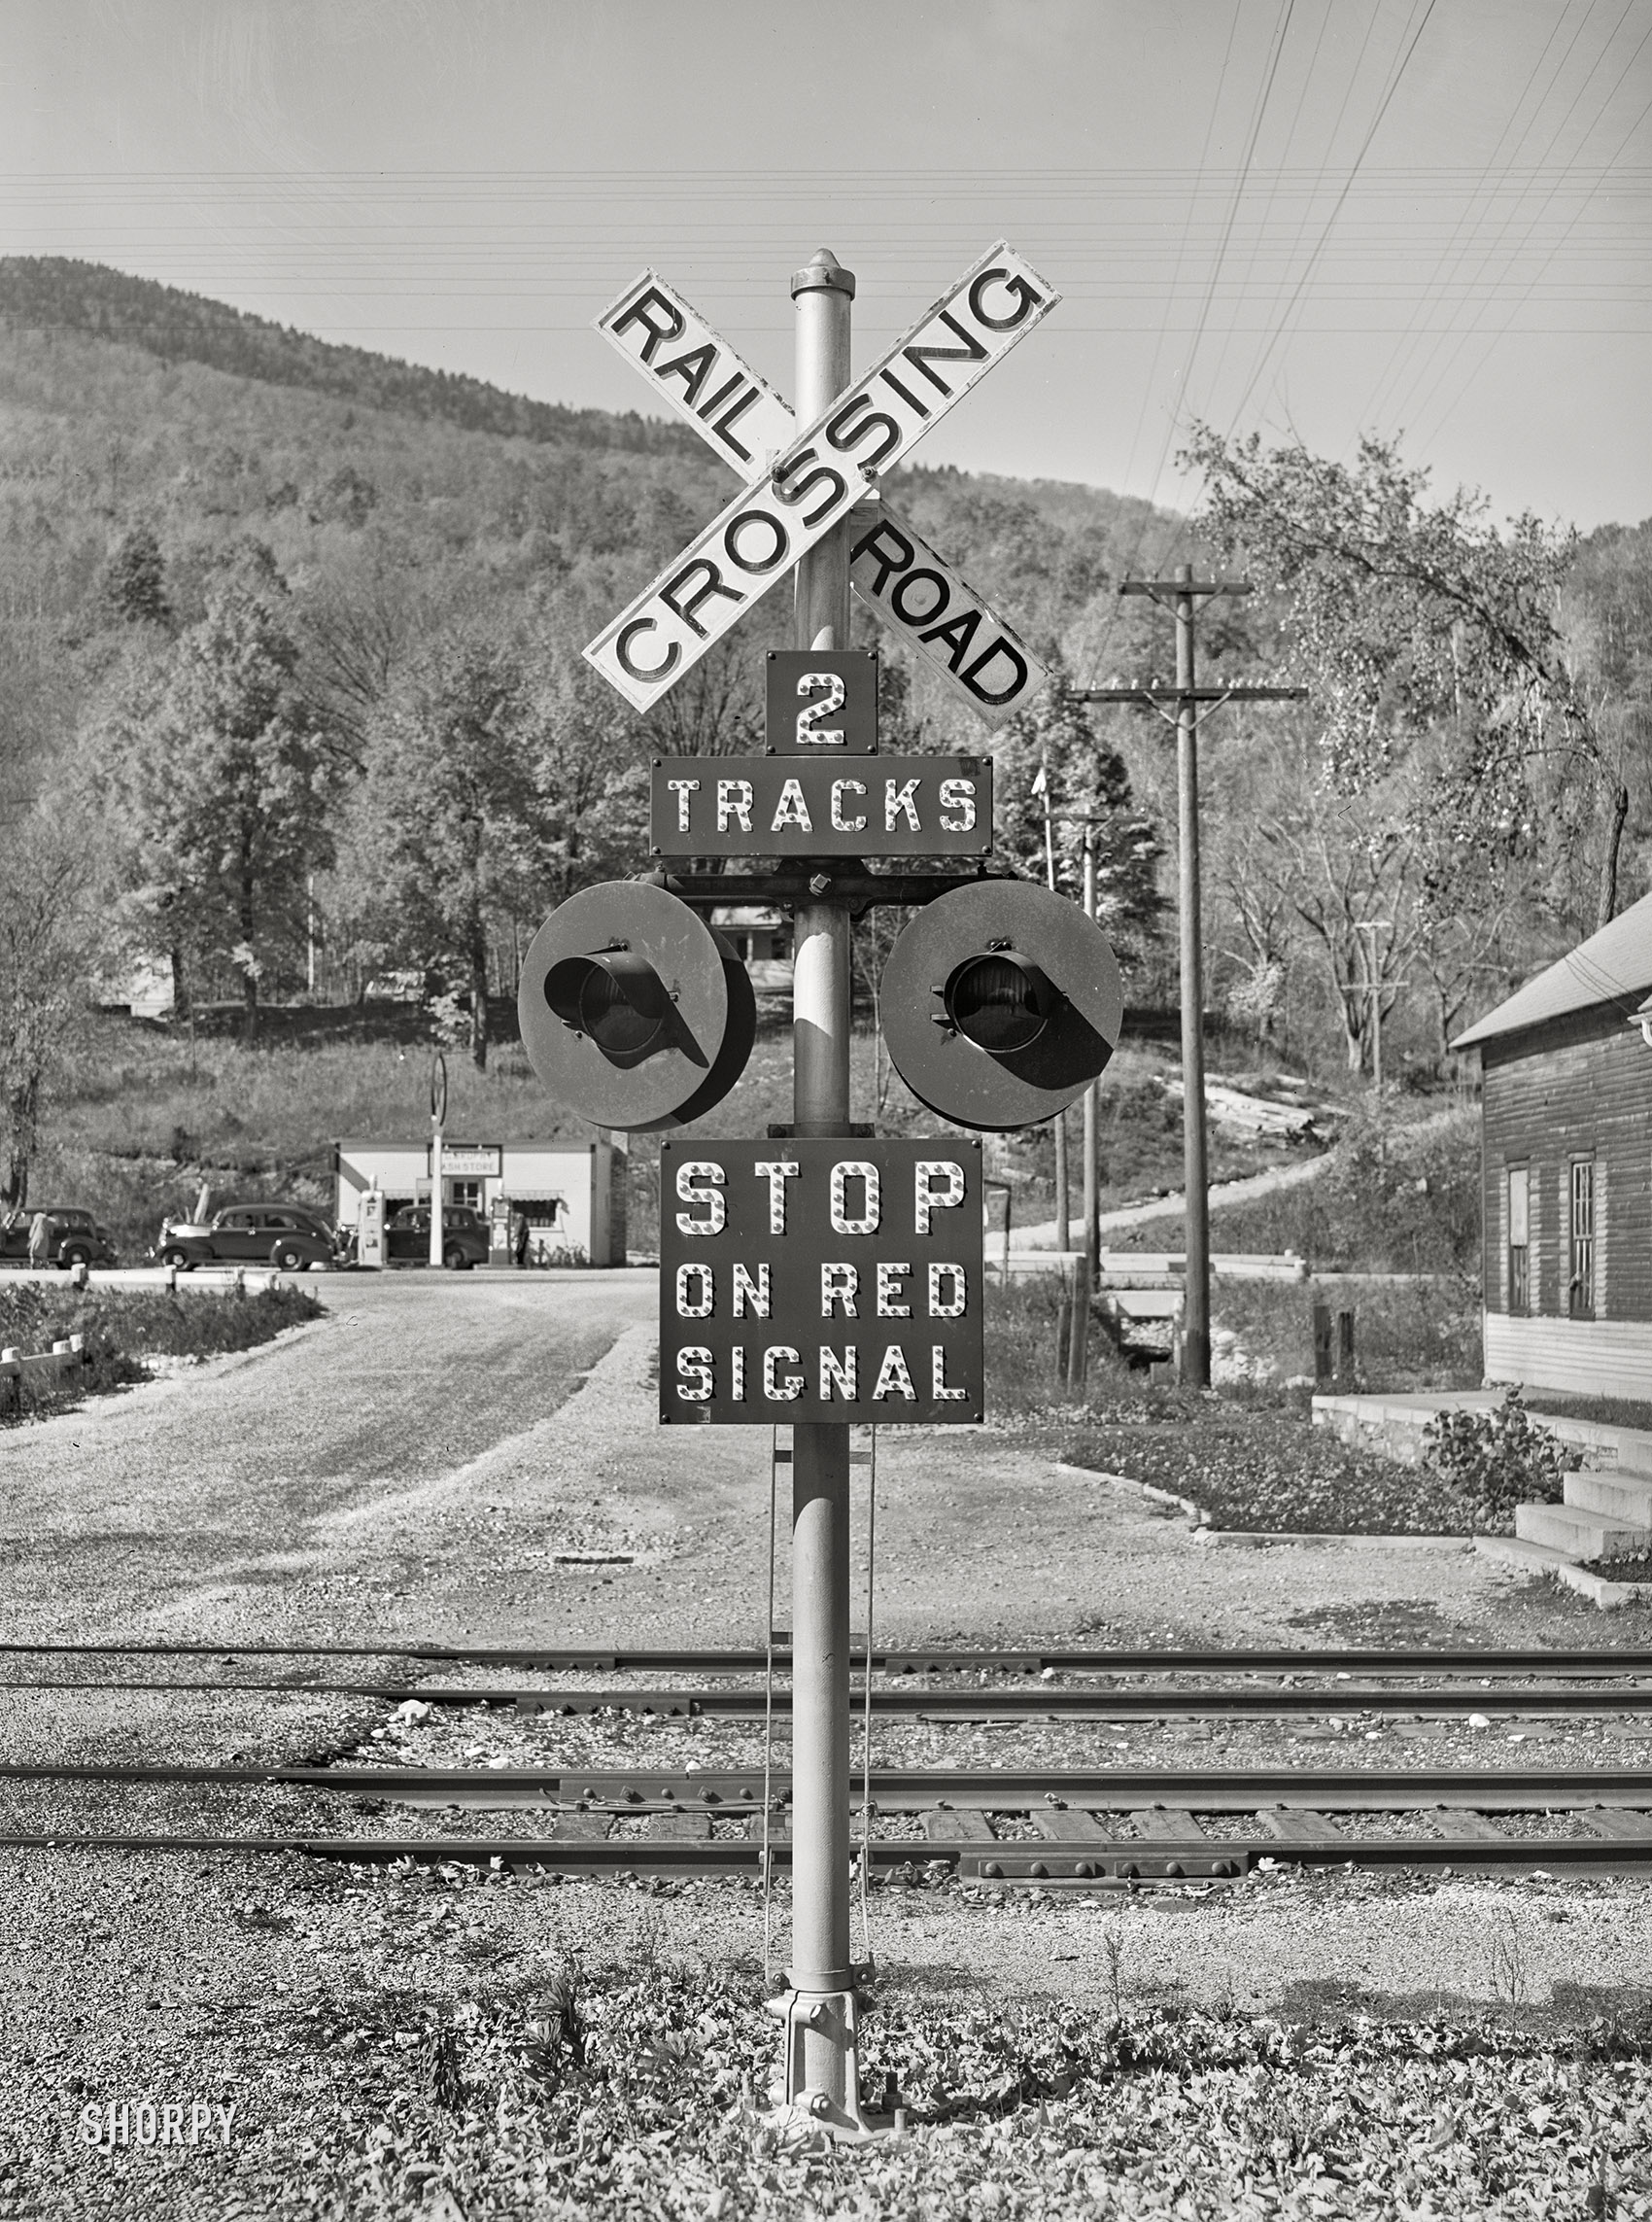 October 1939. "Railroad crossing near Shaftsbury, Vermont." Medium format negative by Russell Lee for the Farm Security Administration. View full size.